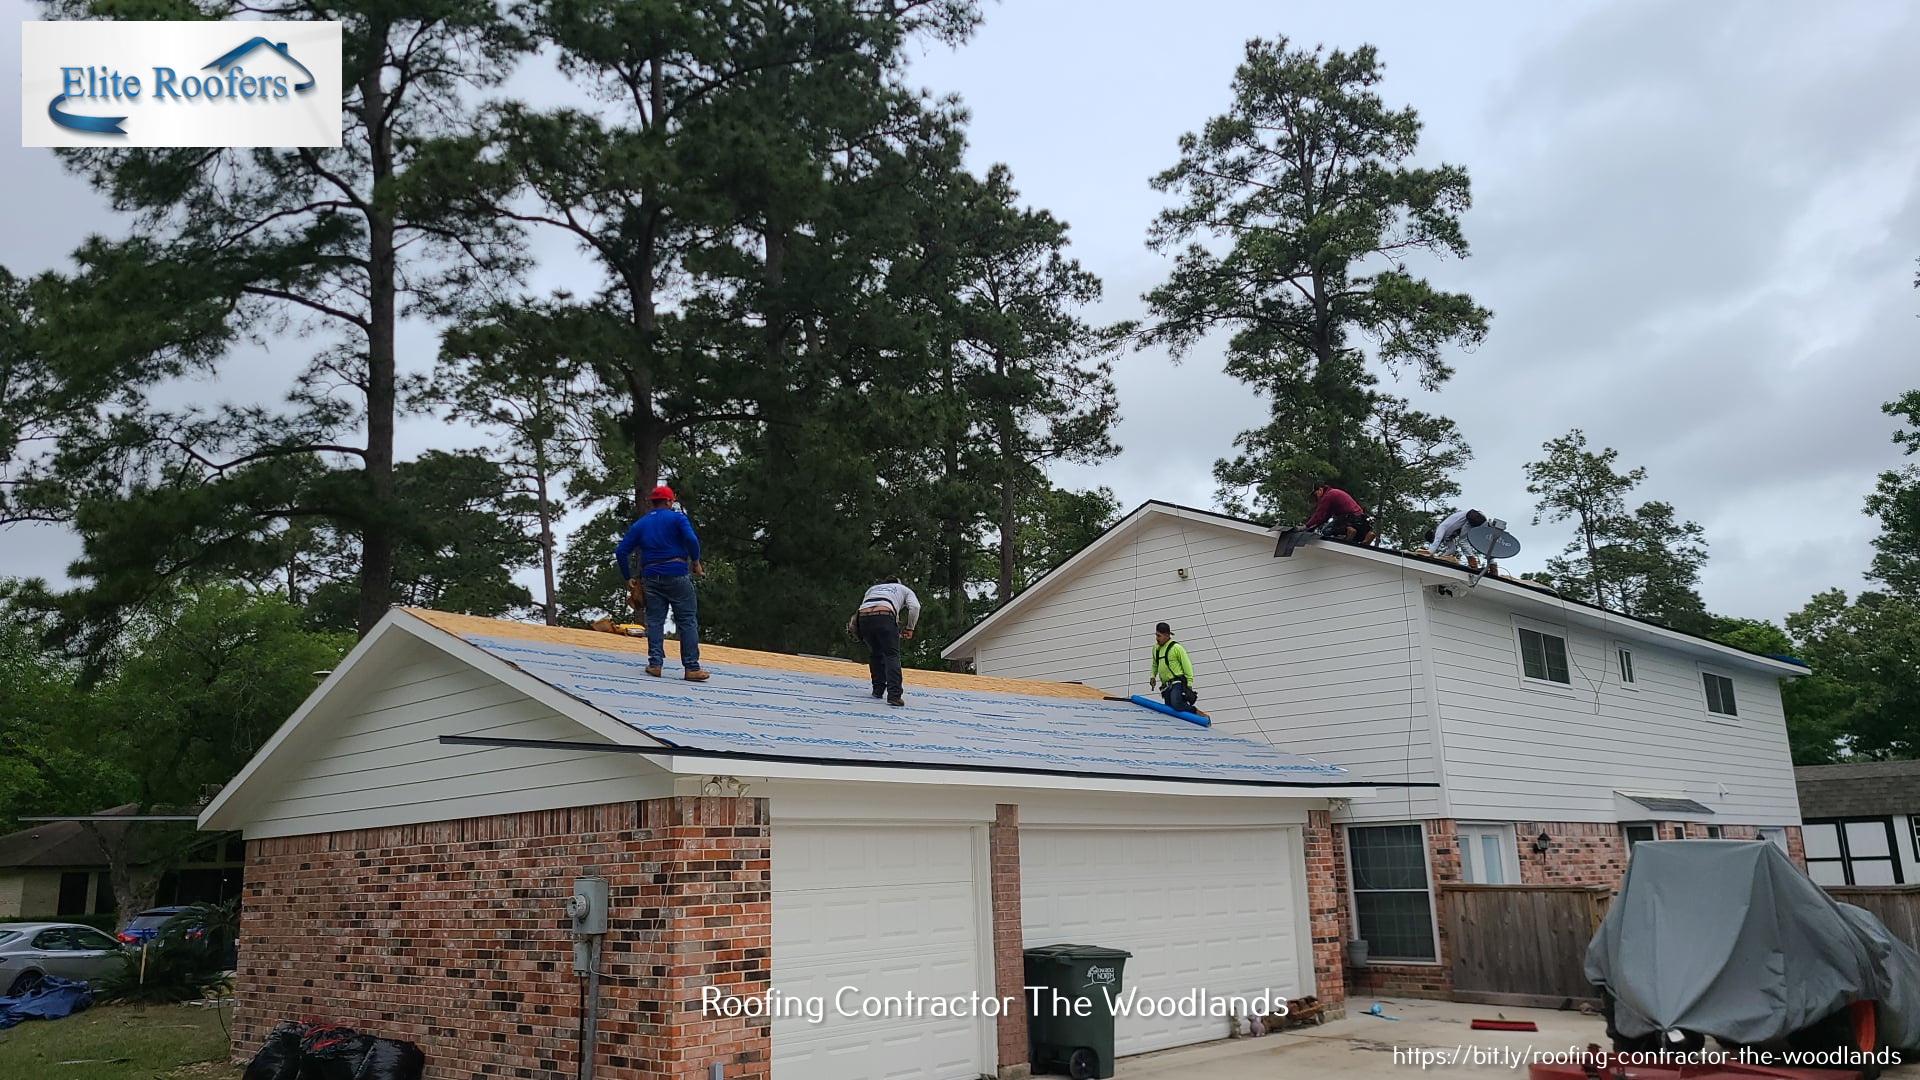 Elite Roofers Continues to Offer the Best Roofing Services in The Woodlands, TX